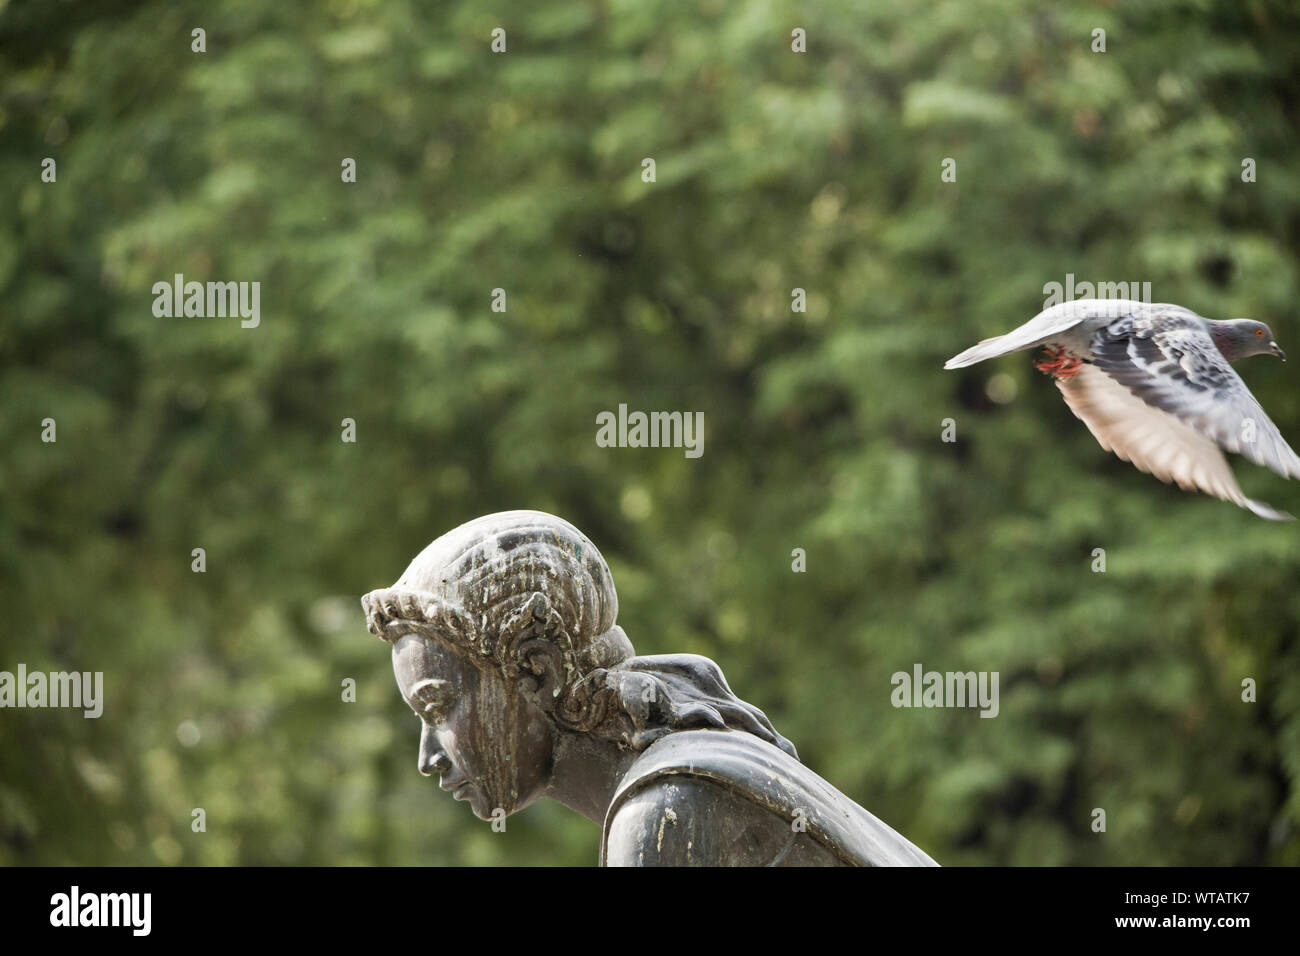 Pigeon flying above woman statue Stock Photo